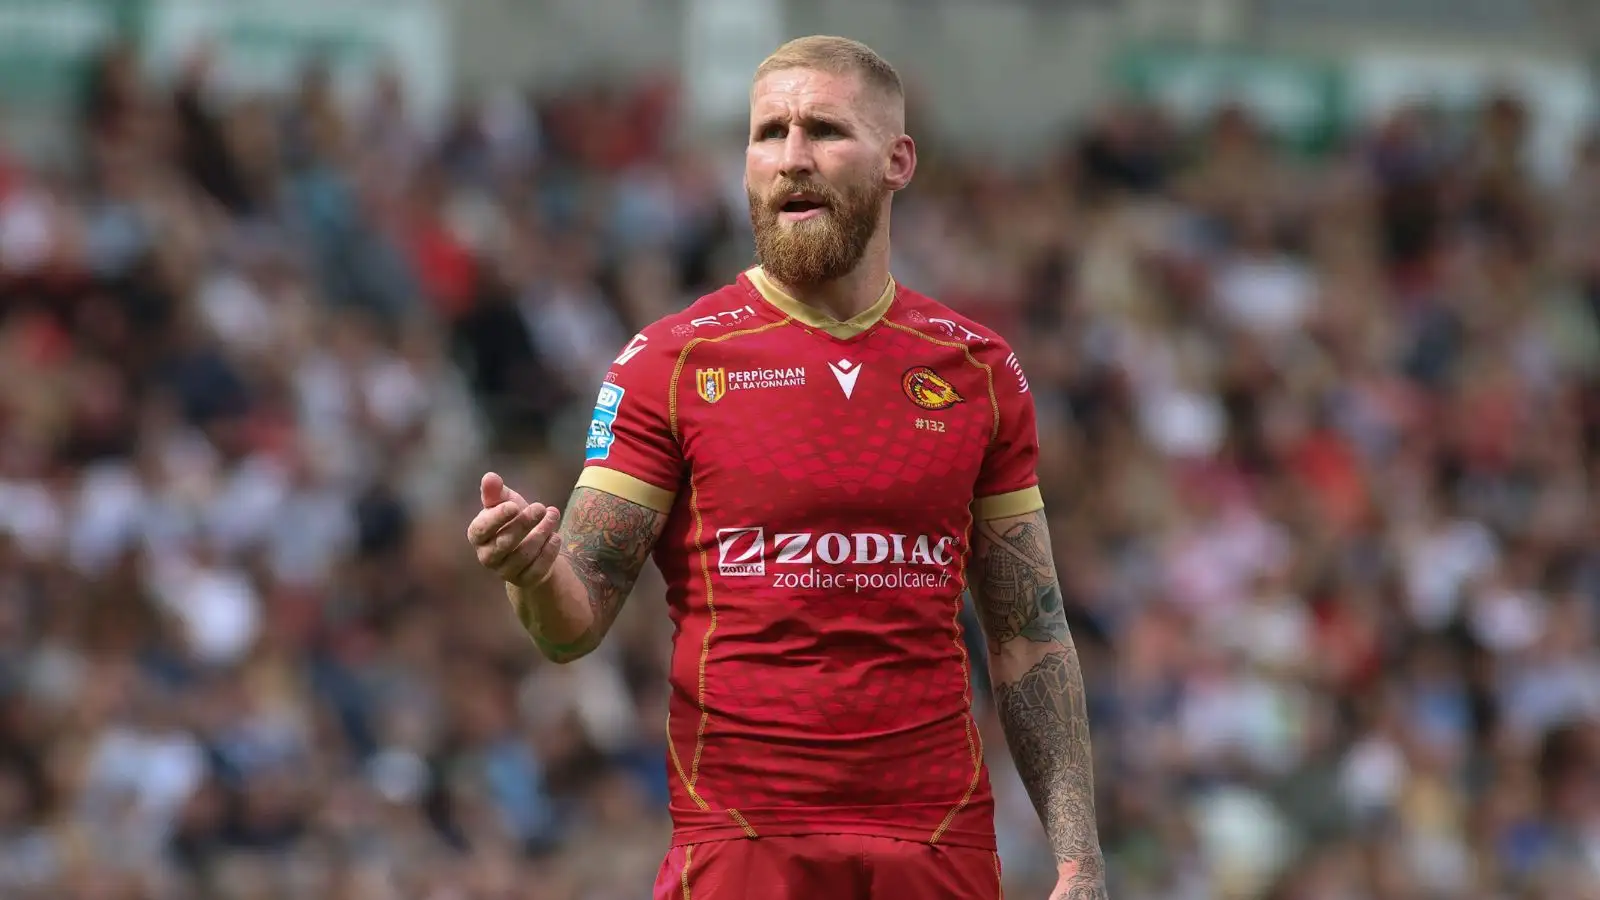 Sam Tomkins escapes suspension but charged with ‘raising knee in tackle’ as Wigan, Castleford receive bans